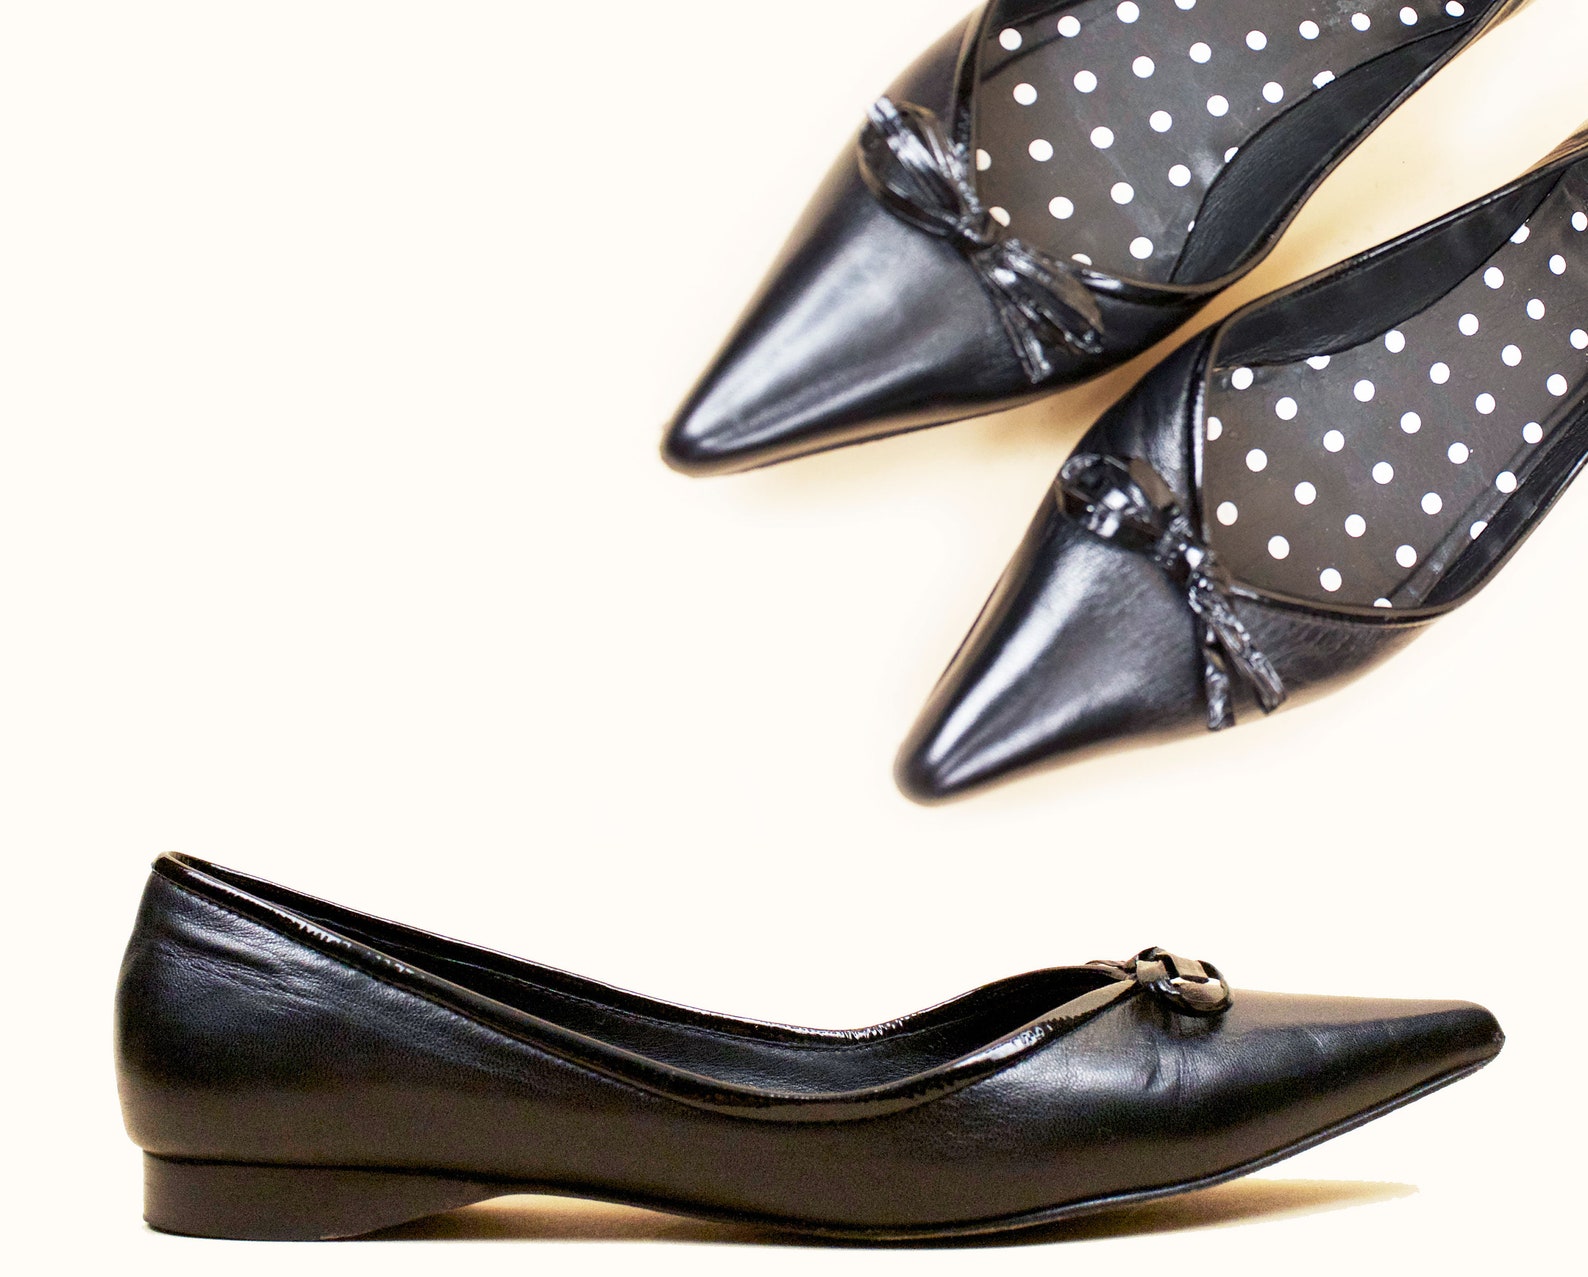 90s does 60s vtg black pointed ballet flats genuine leather with patent bow by arturo chiang / slip on pin up mod 6.5 eu 37